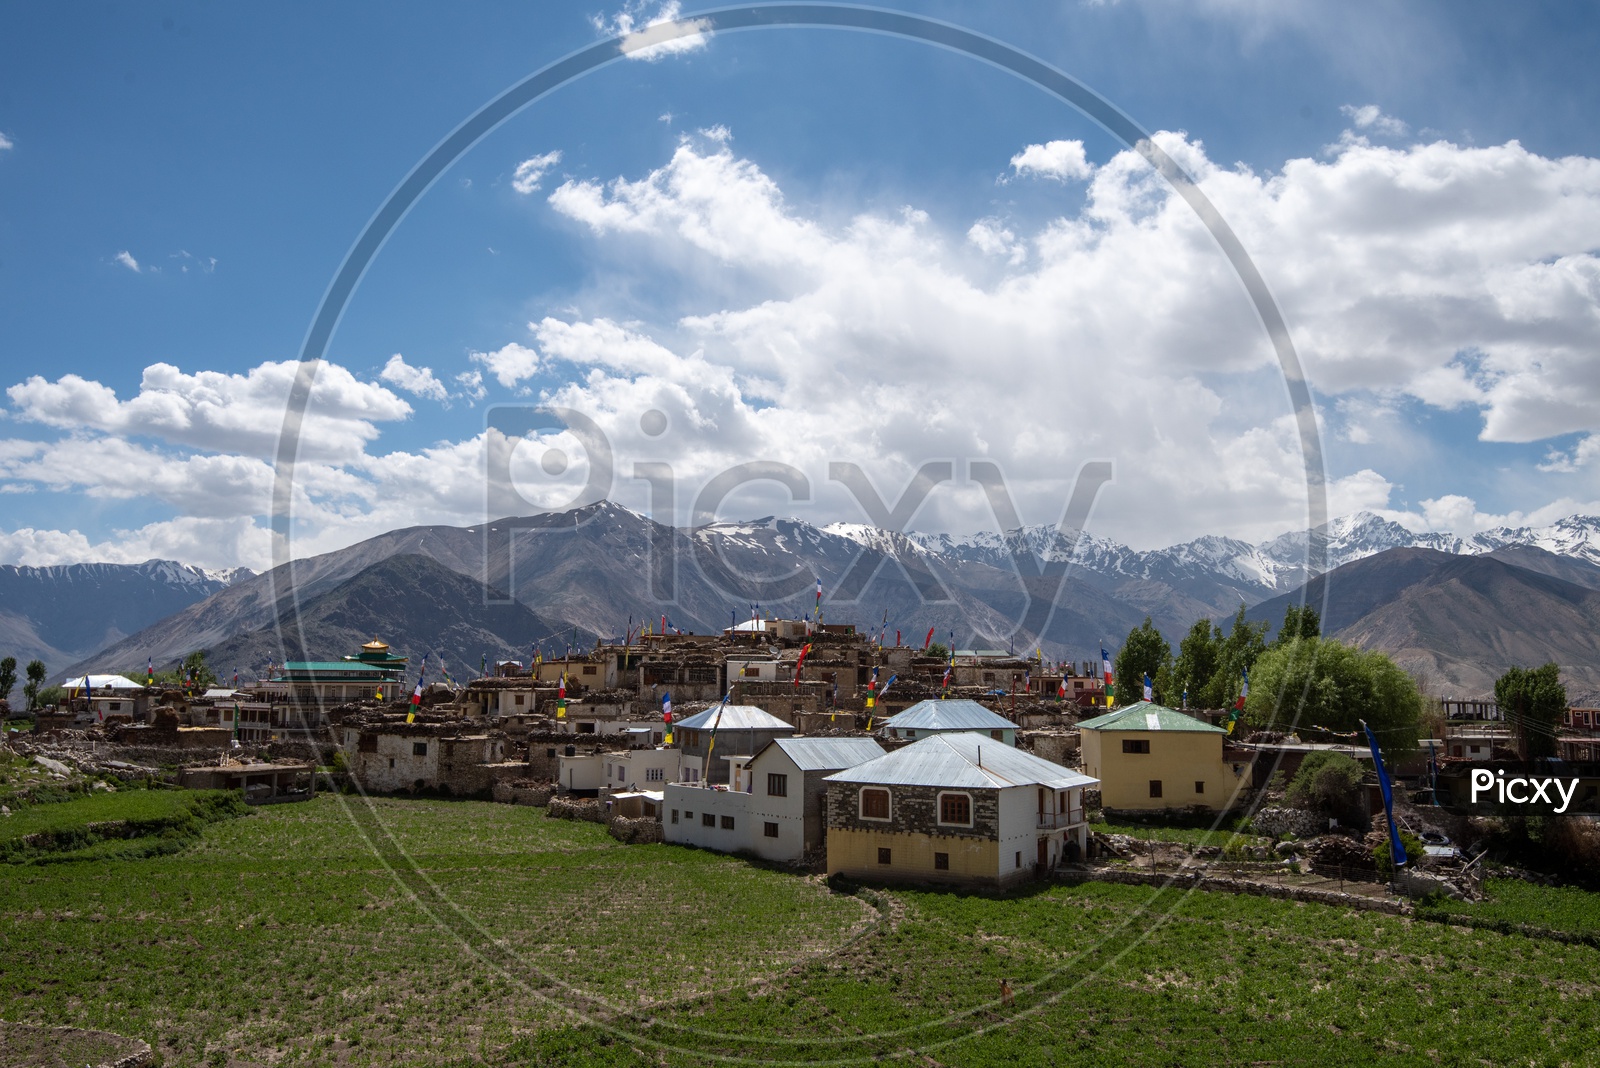 Snow capped Mountains of Spiti Valley with houses and agriculture fields